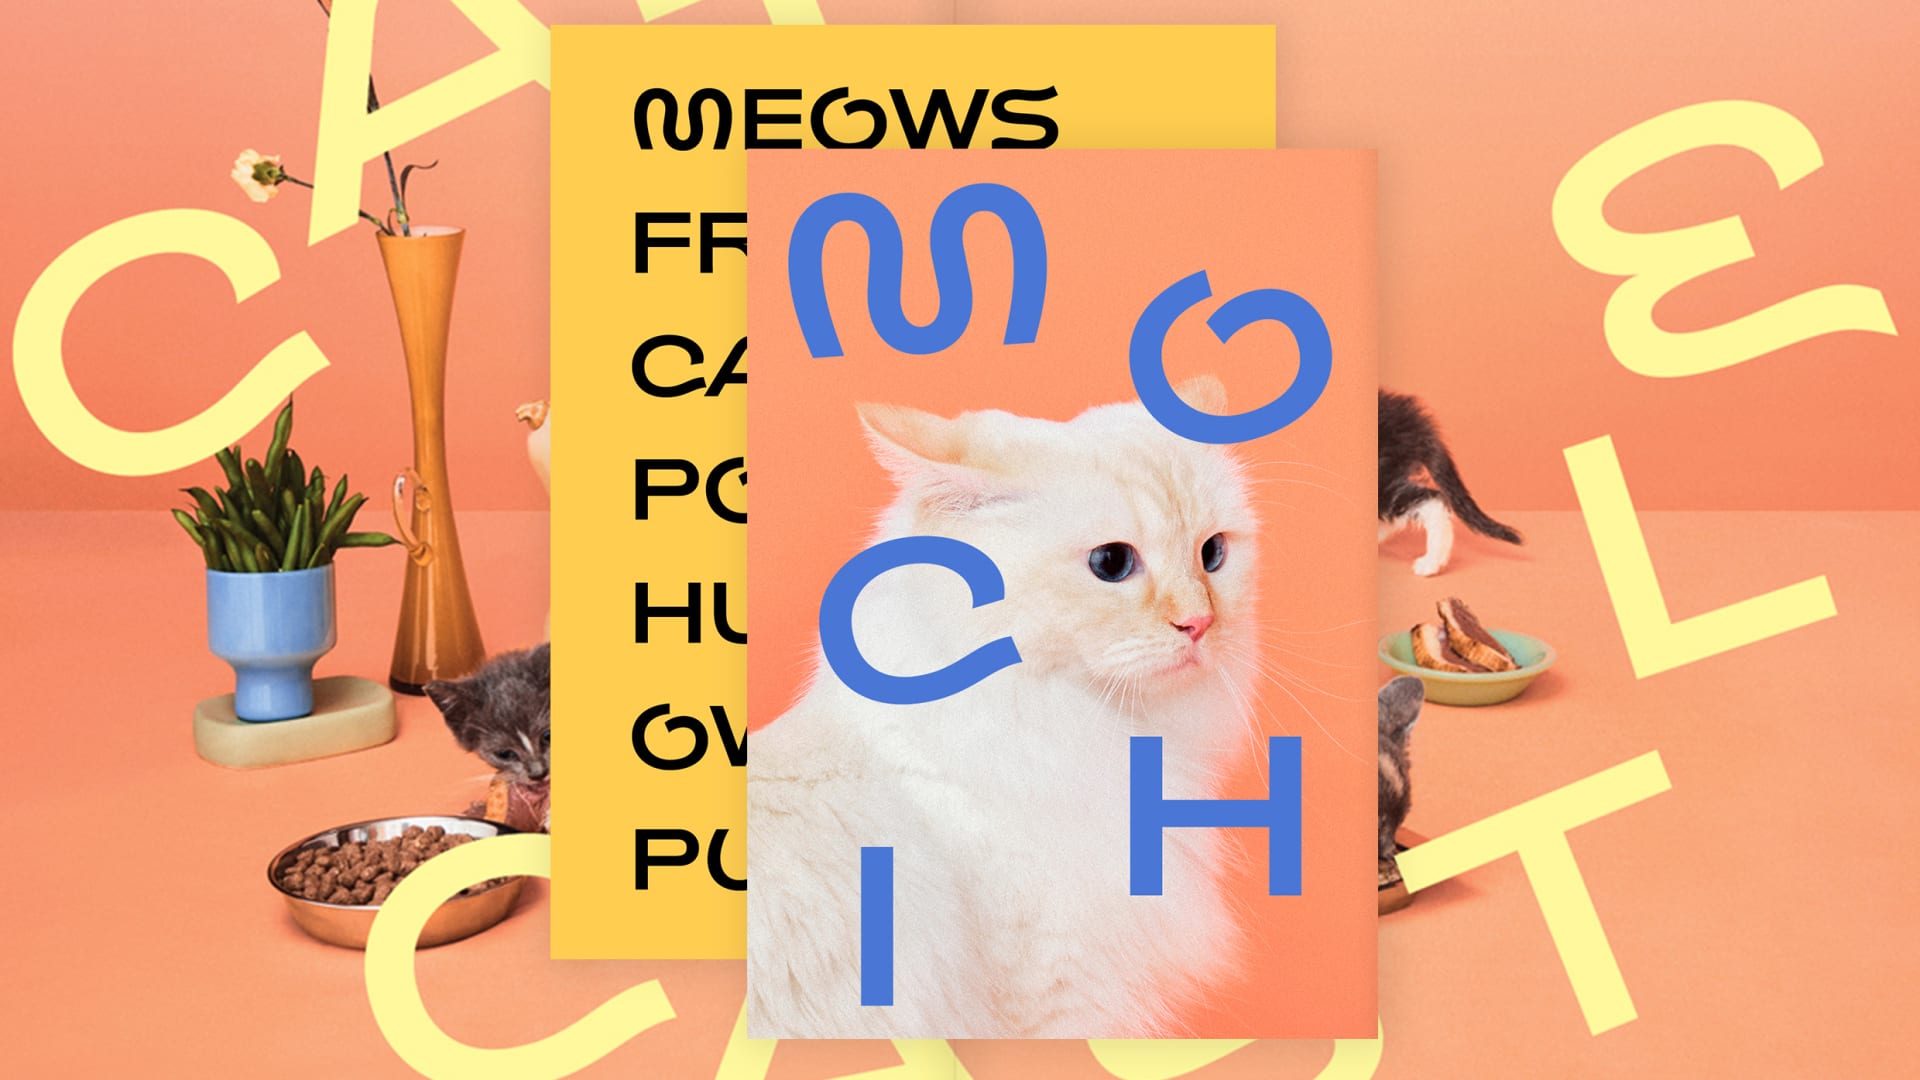 This cat font rules (and dog fonts drool)